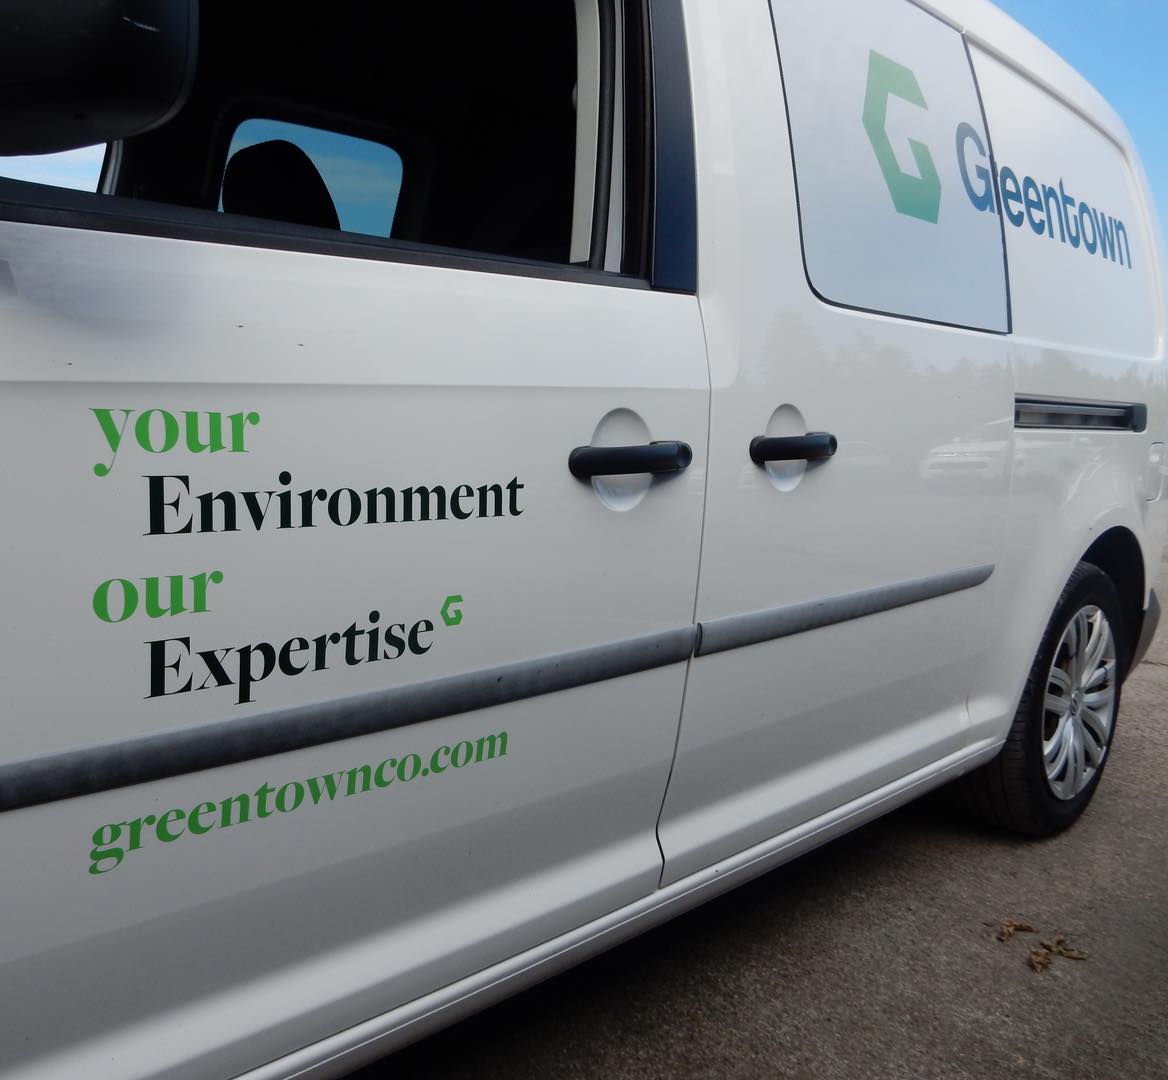 Have You Seen Our New Vans?